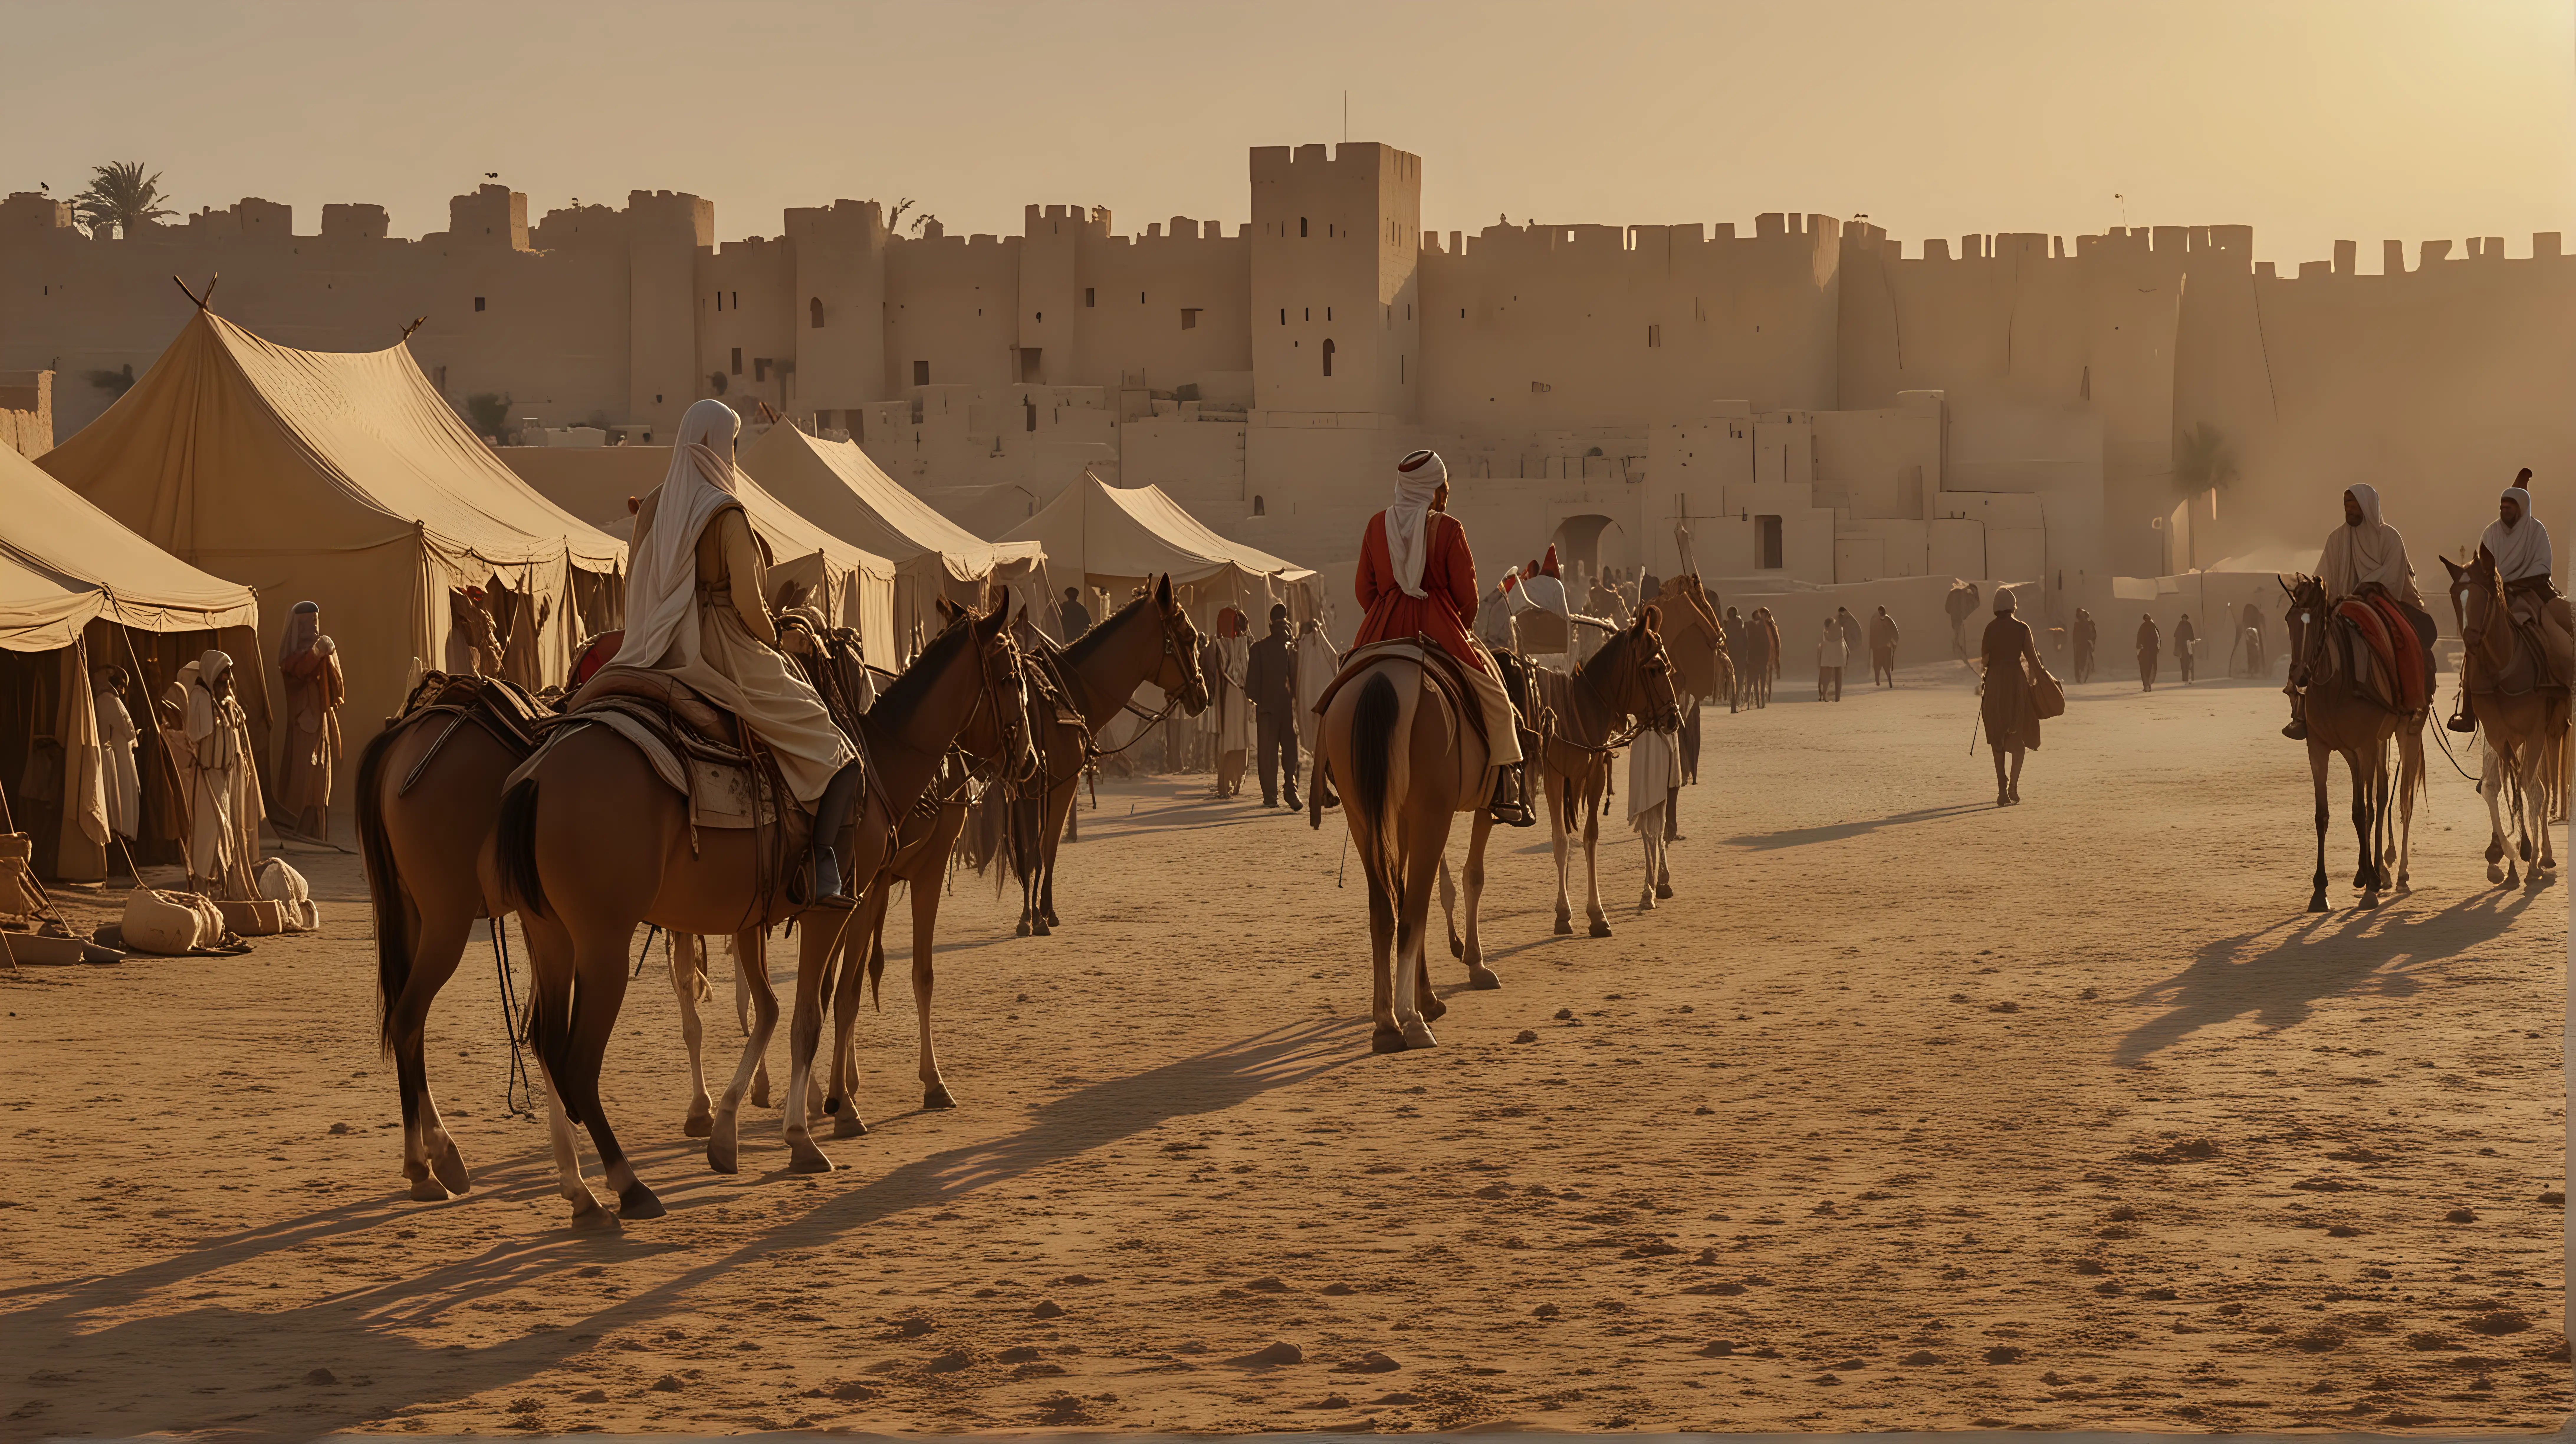 outside the city walls of Sheba, the Queen servants loading  tents and gifts on horses and donkeys, before their journey to meet king Salomon, four legs only camels and horses  richly adorned,, early dawn, soft light, close-up, very realistic and cinematic, Cecil B. de MIlle's Ten Commandment style 